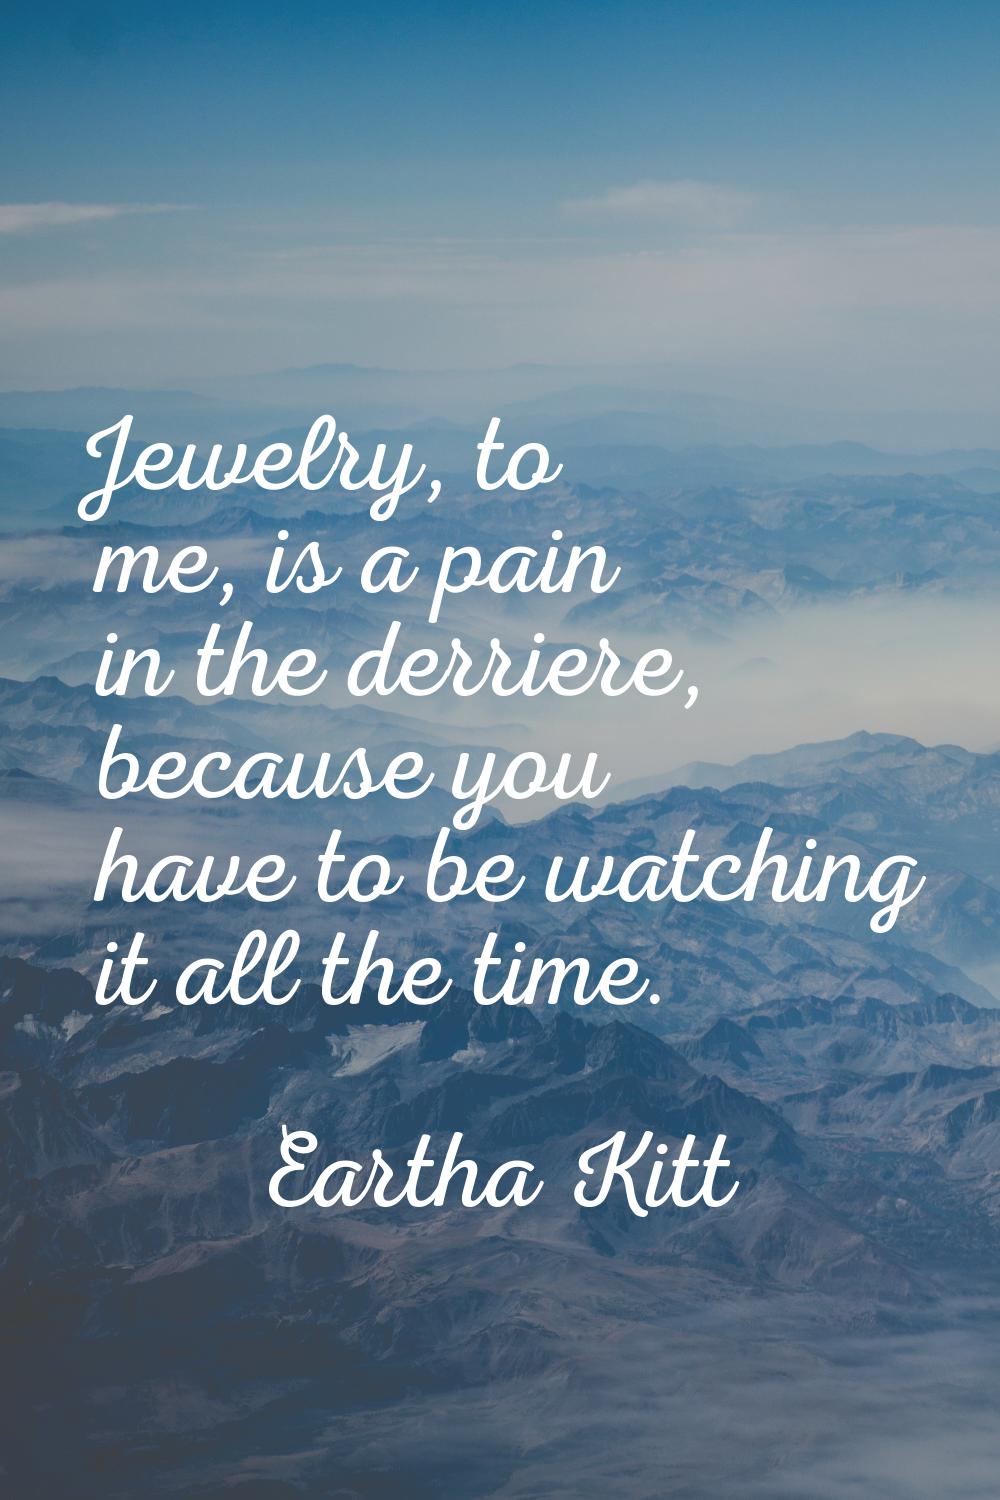 Jewelry, to me, is a pain in the derriere, because you have to be watching it all the time.